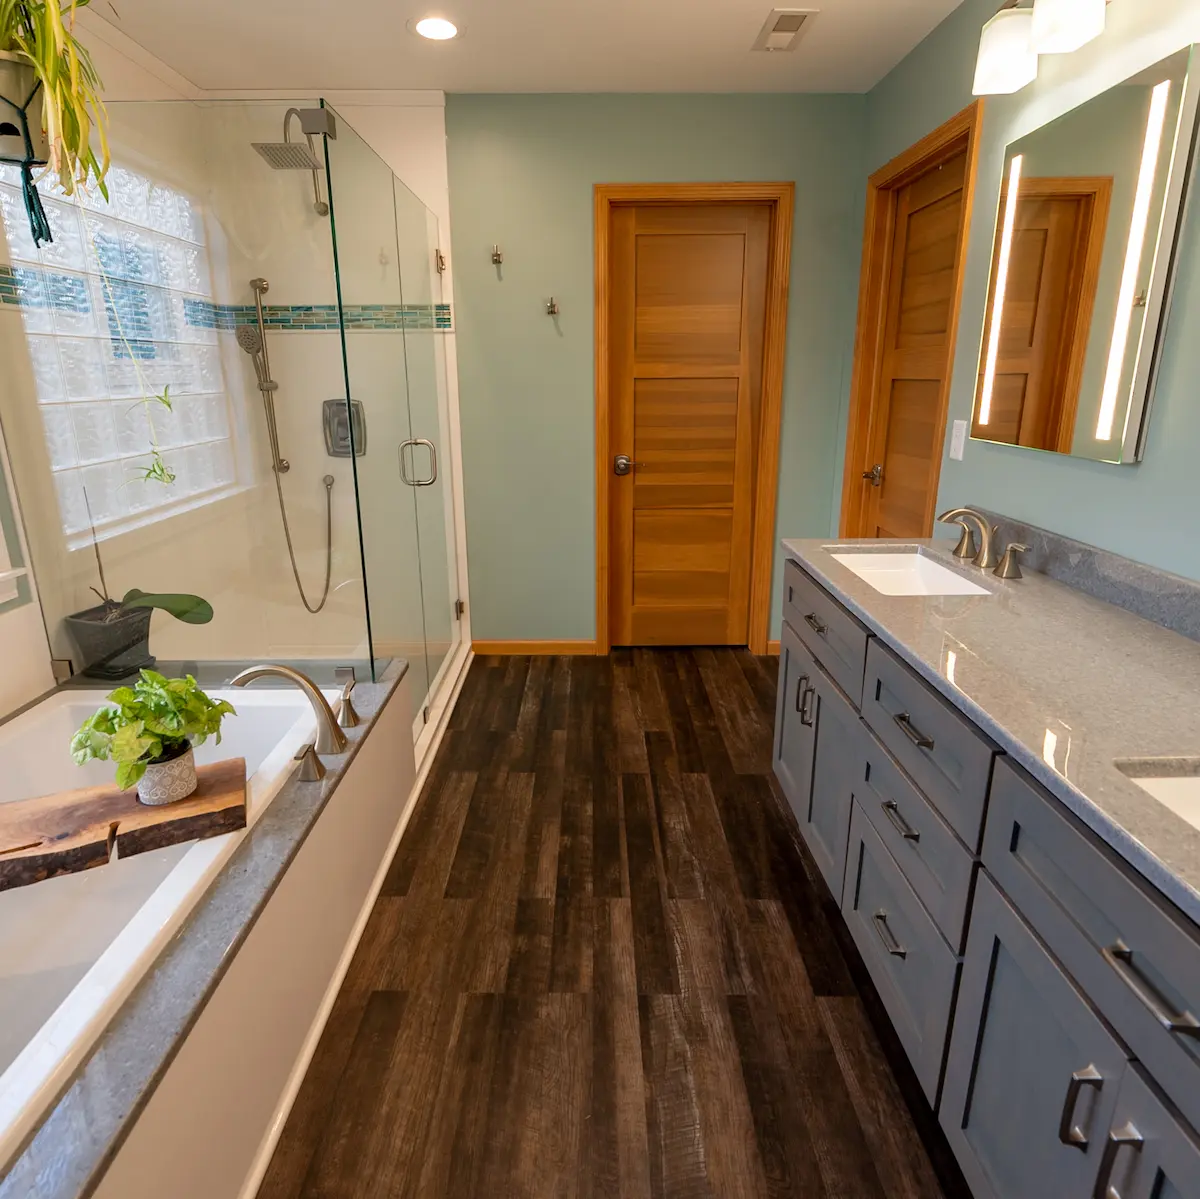 Bathroom Remodeling Process by Construction Specialties Explained by Lawrence KS remodelers